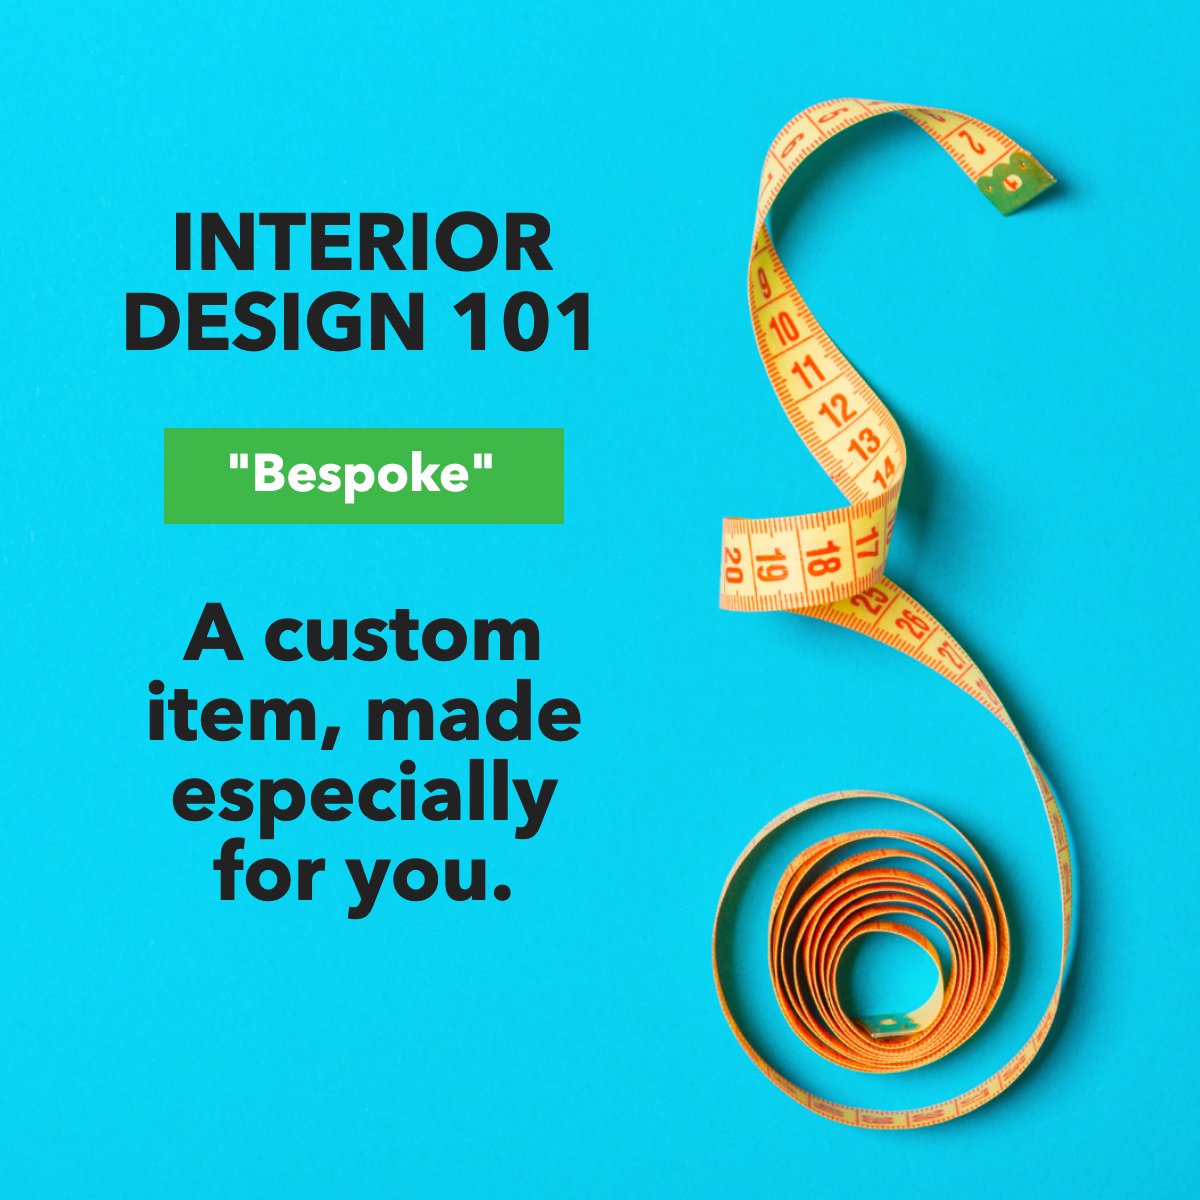 Have you ever ordered a custom item?

There is a specific term for custom items in interior design 

#interiorsdesign #interiortrends #interiordesigning #interiordesigntrends #interiorsaddict #interiordesigntips #interiordesigngoals 

 #buyersagent #listingspecialist